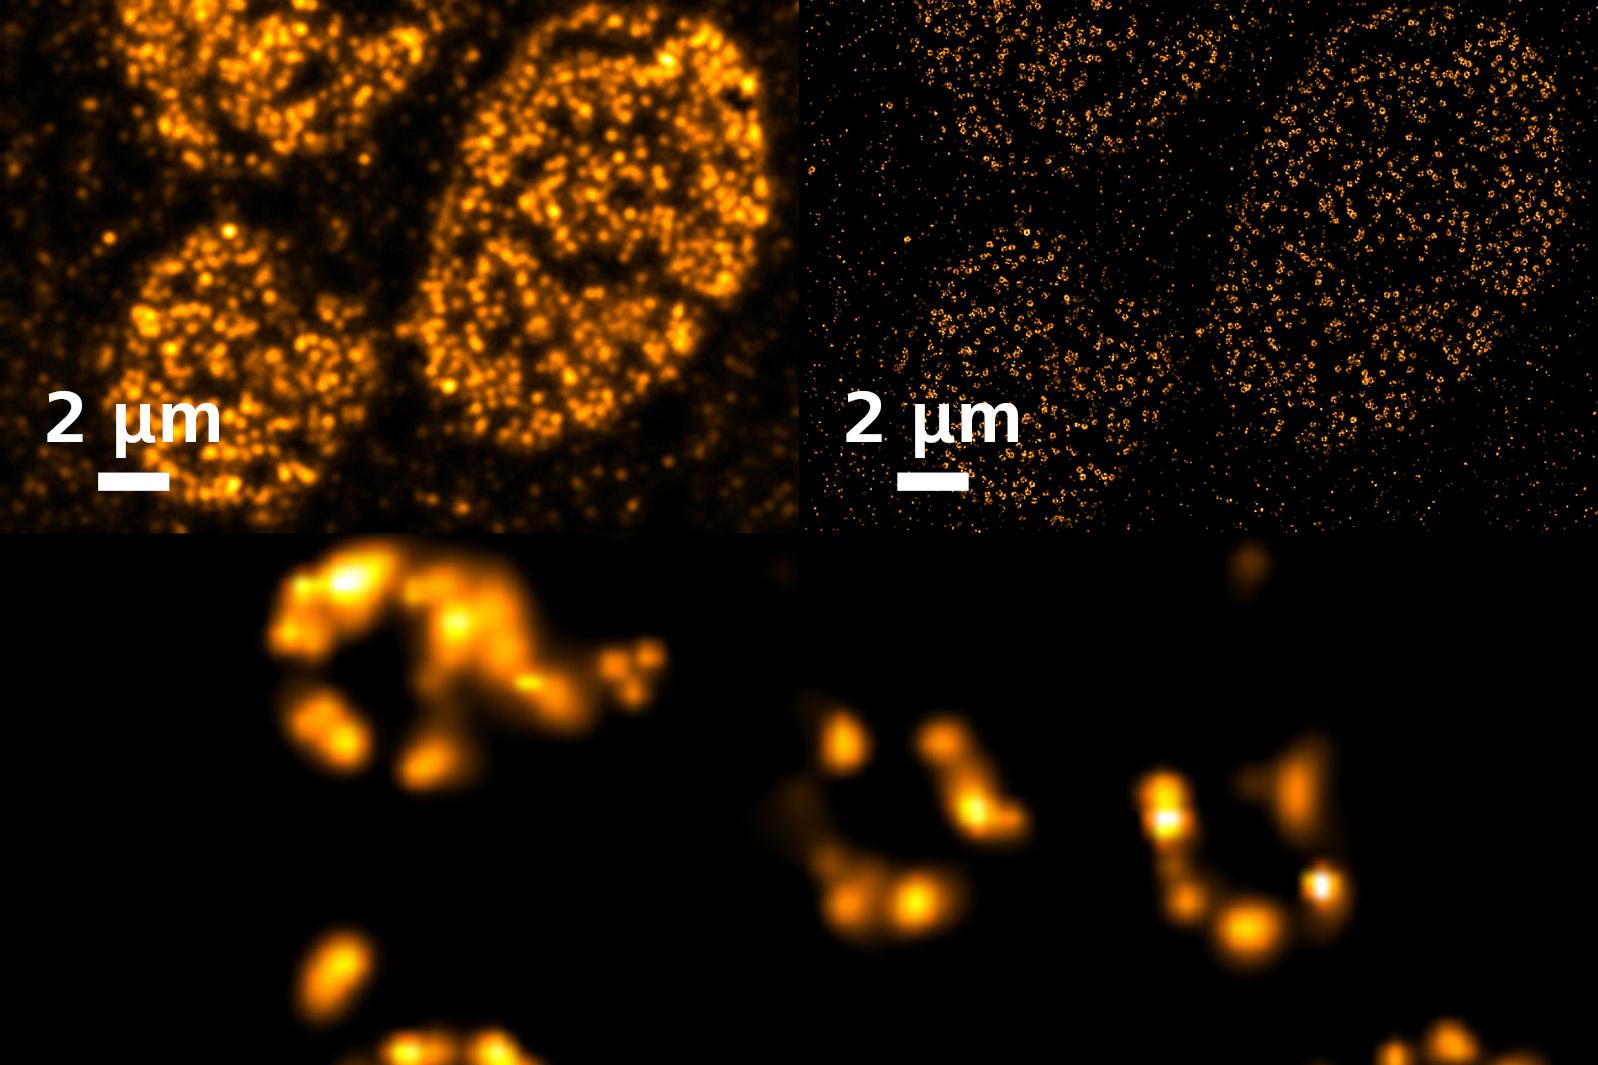 SMLM: Eightfold symmetry of the nuclear pore complex in A6 cell.